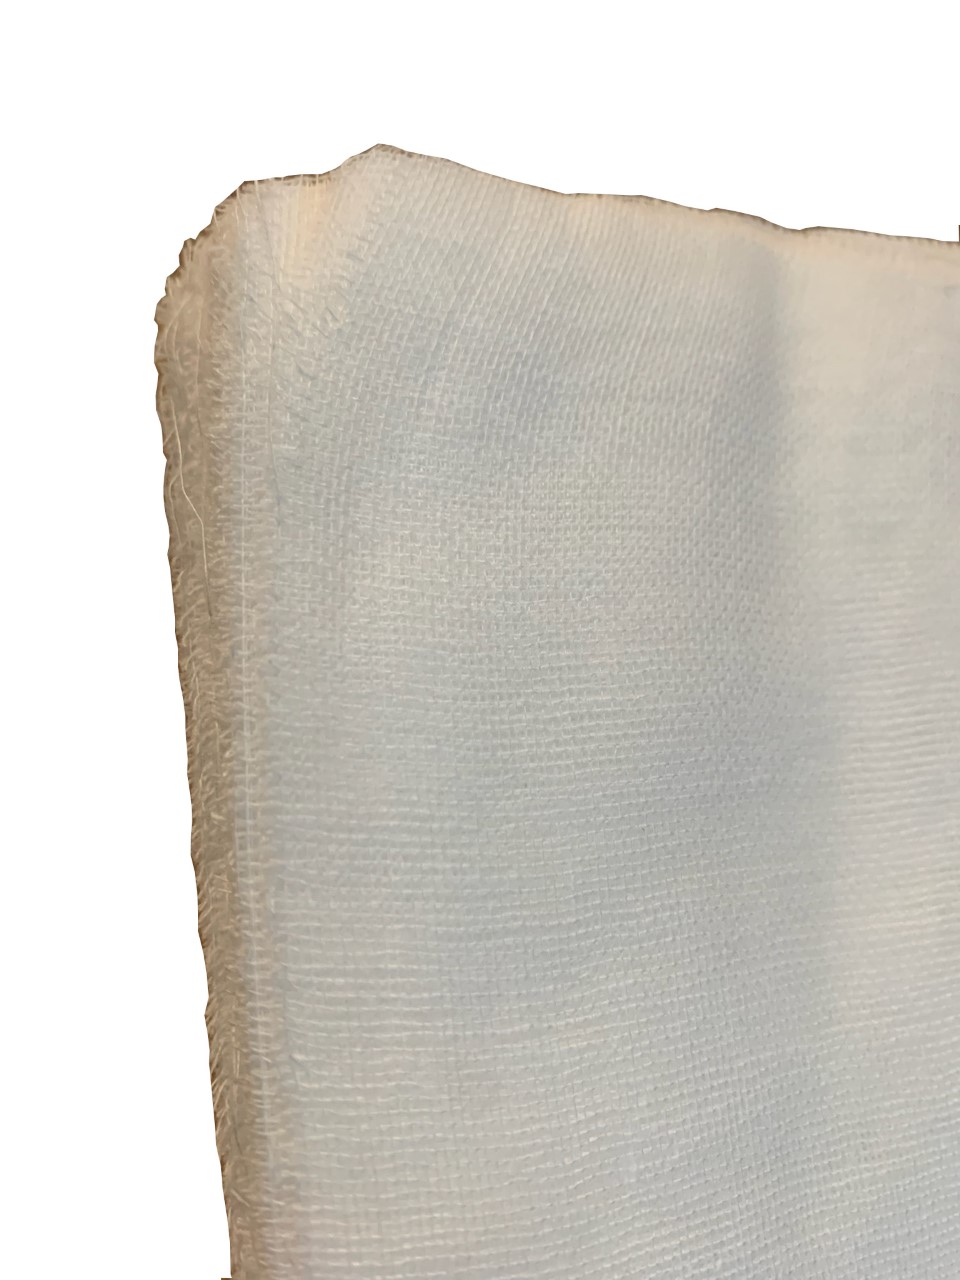 16" x 16" Grade 60 Cheesecloth Bleached Squares 100 Pk - Click Image to Close